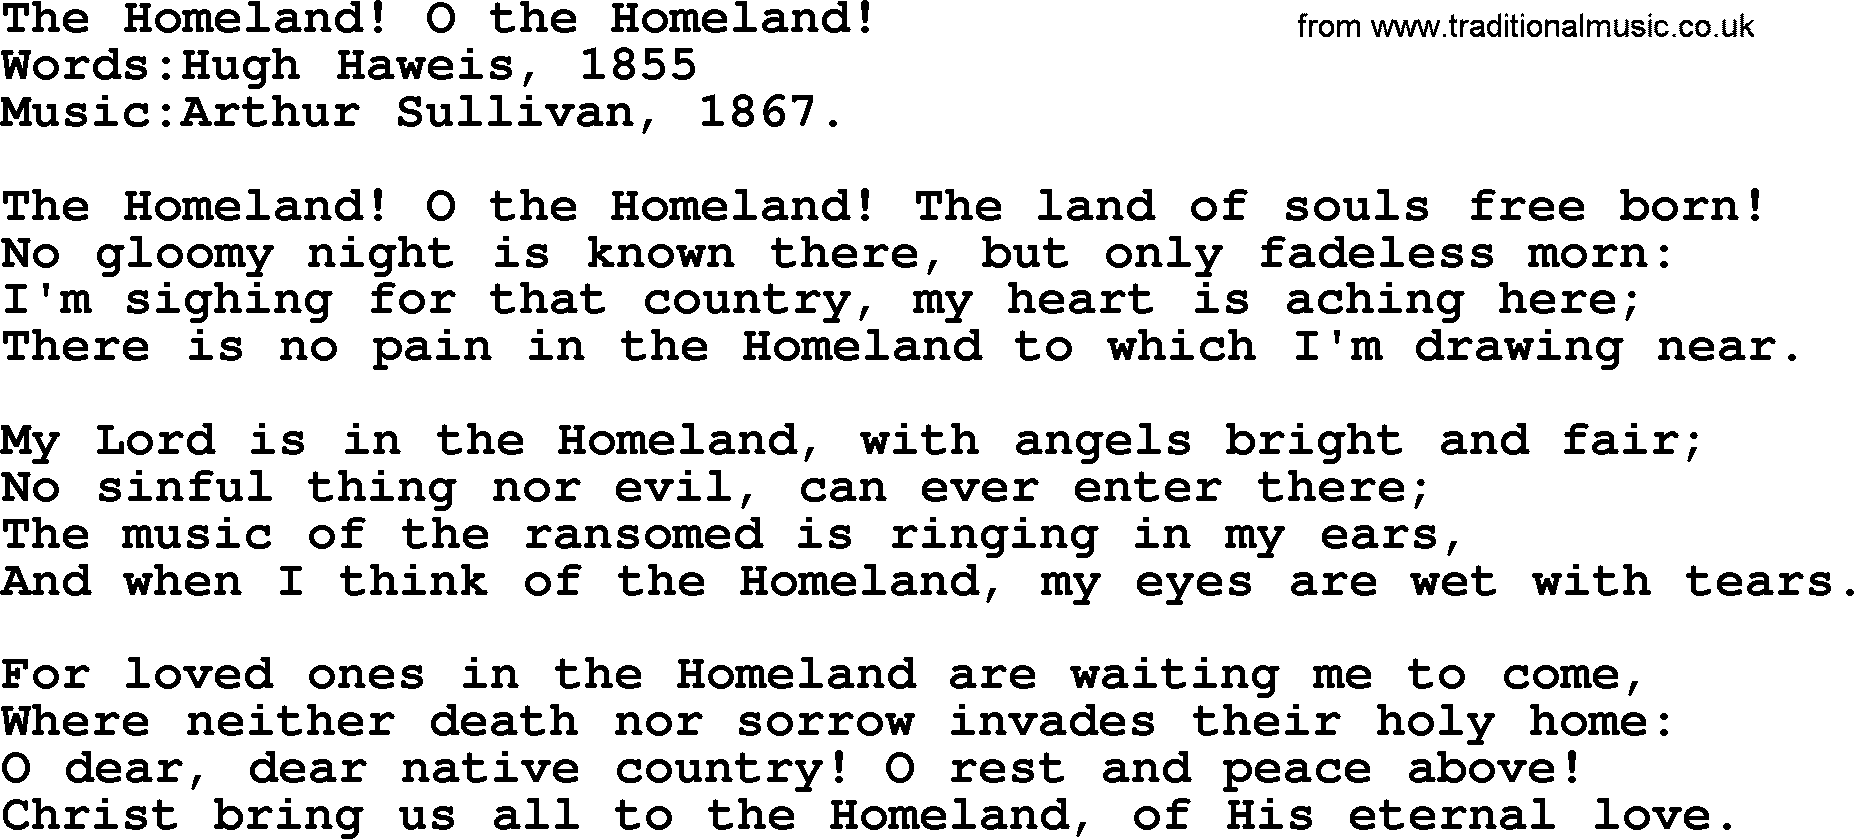 Songs and Hymns about Heaven: The Homeland! O The Homeland! lyrics with PDF